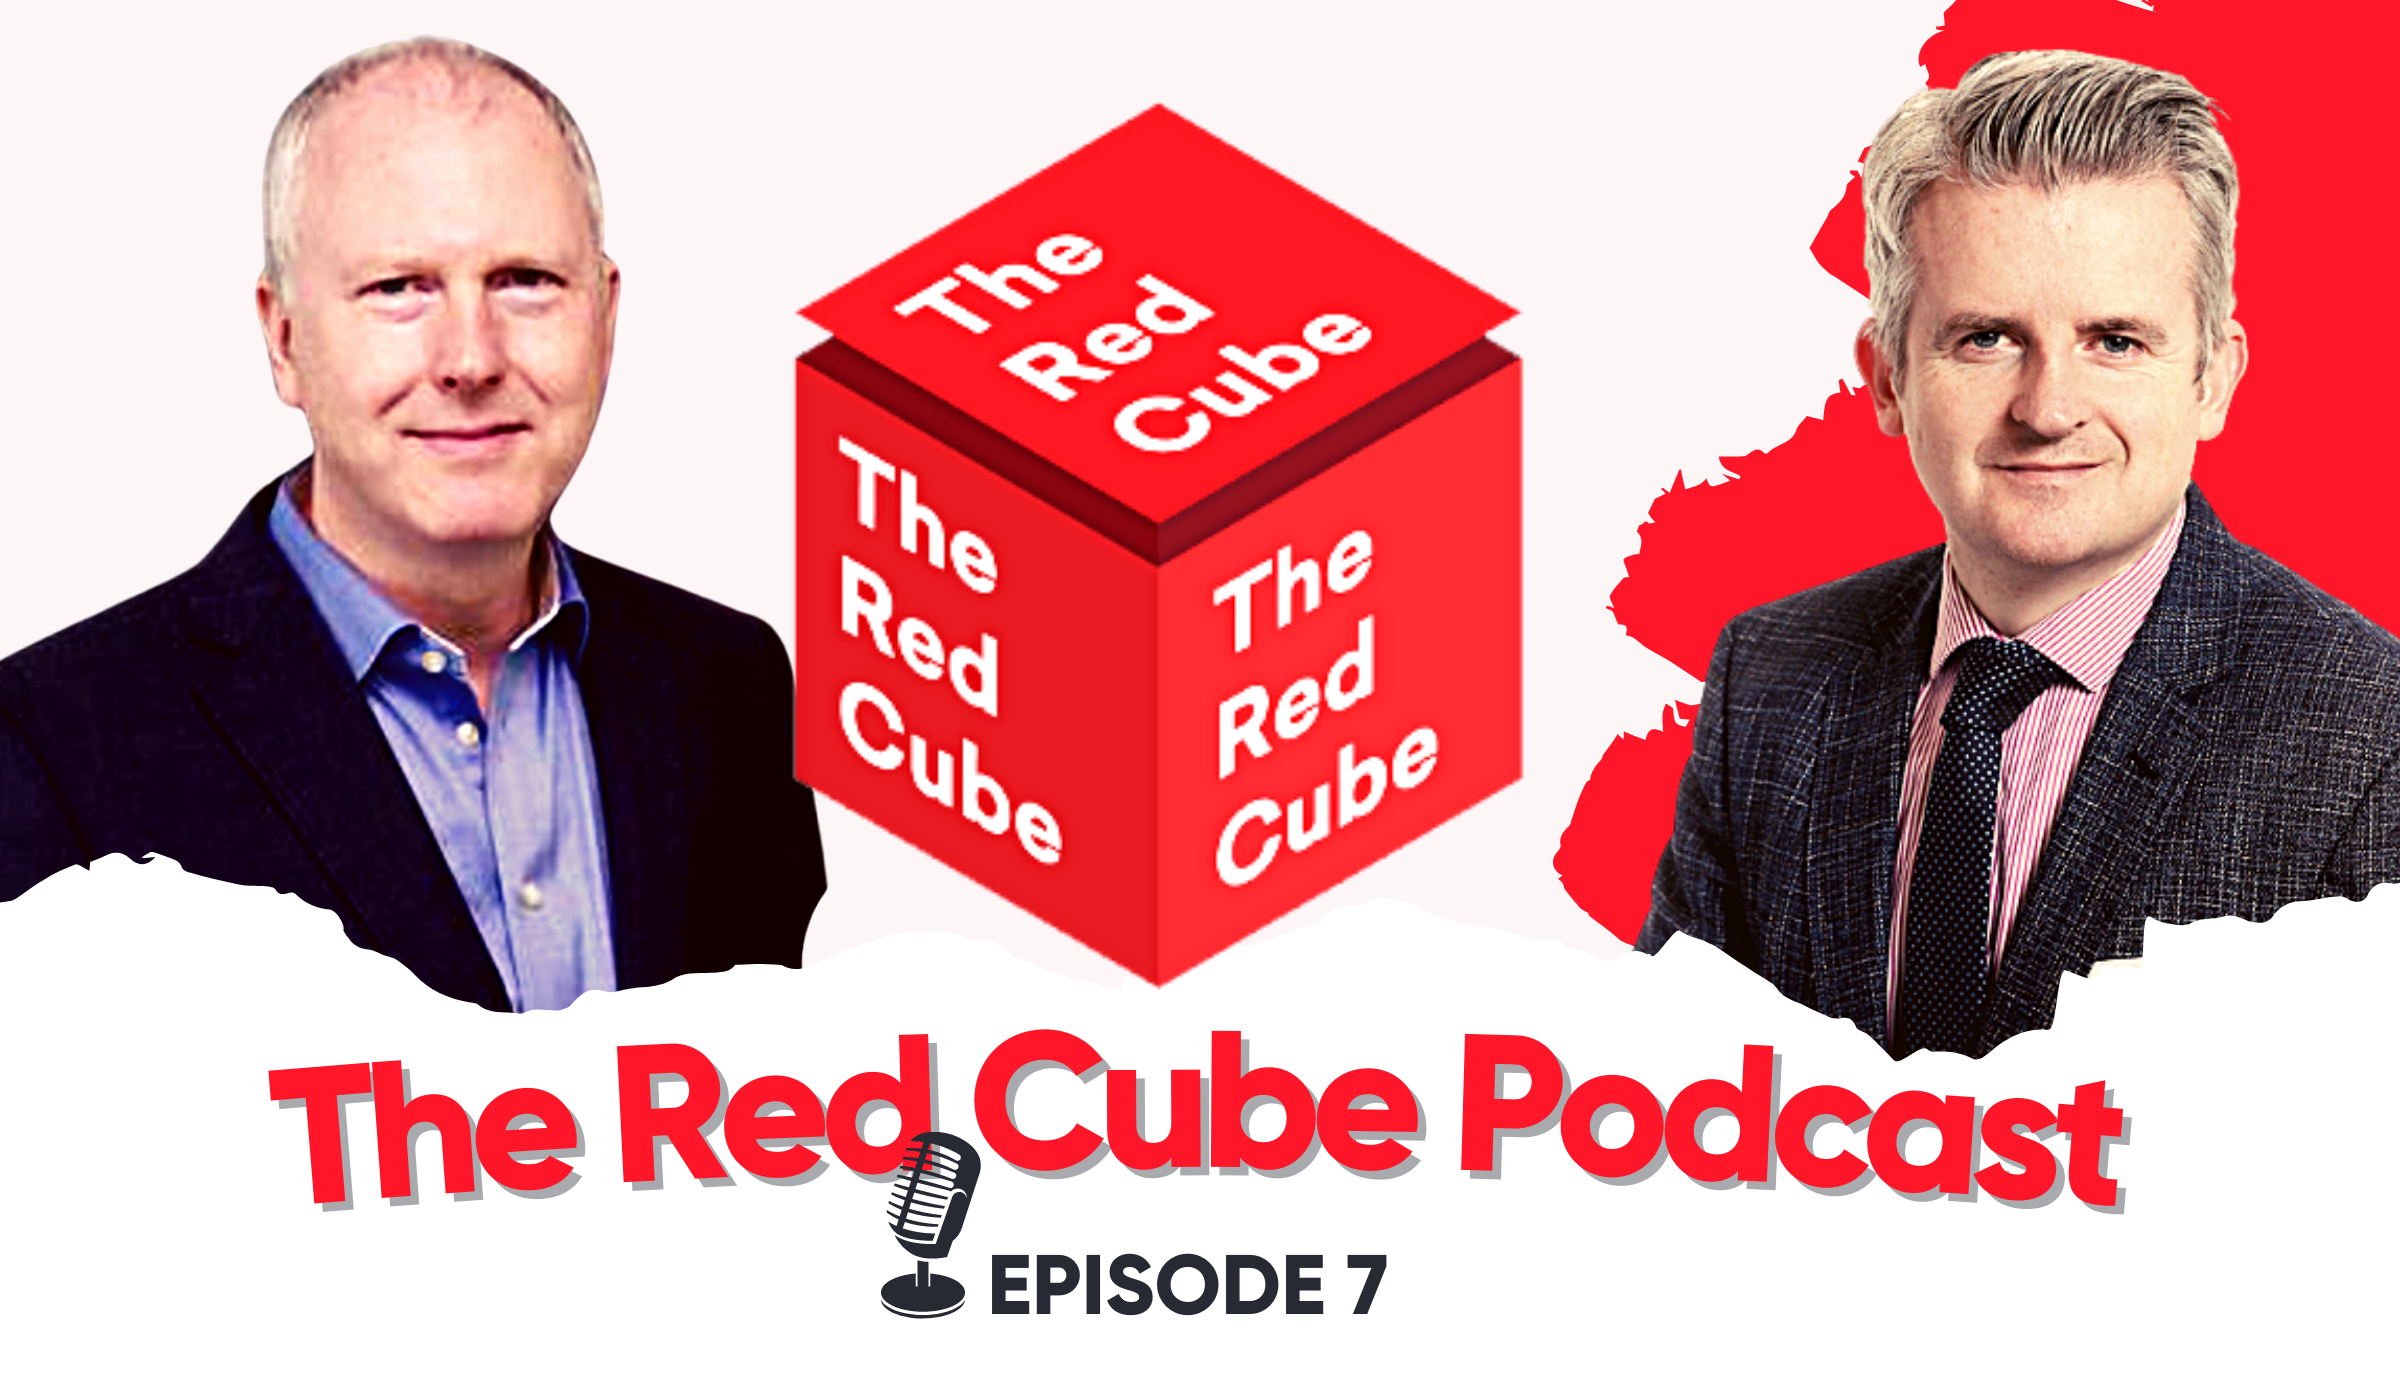 Episode 7: The inner Core of culture: Alan Cox's Lessons Learned